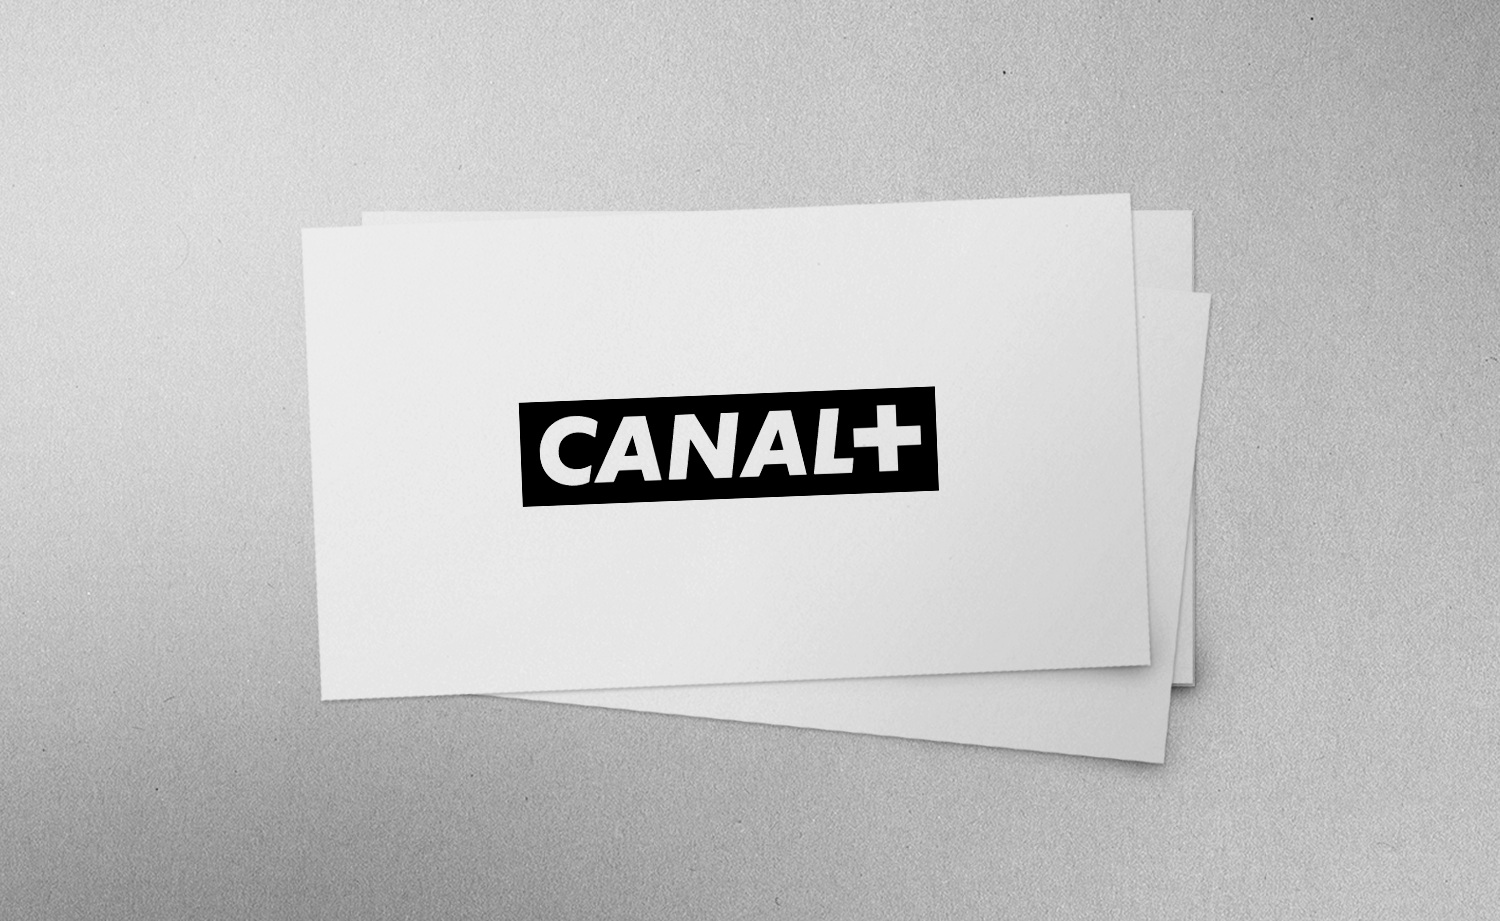 Another project for Canal+